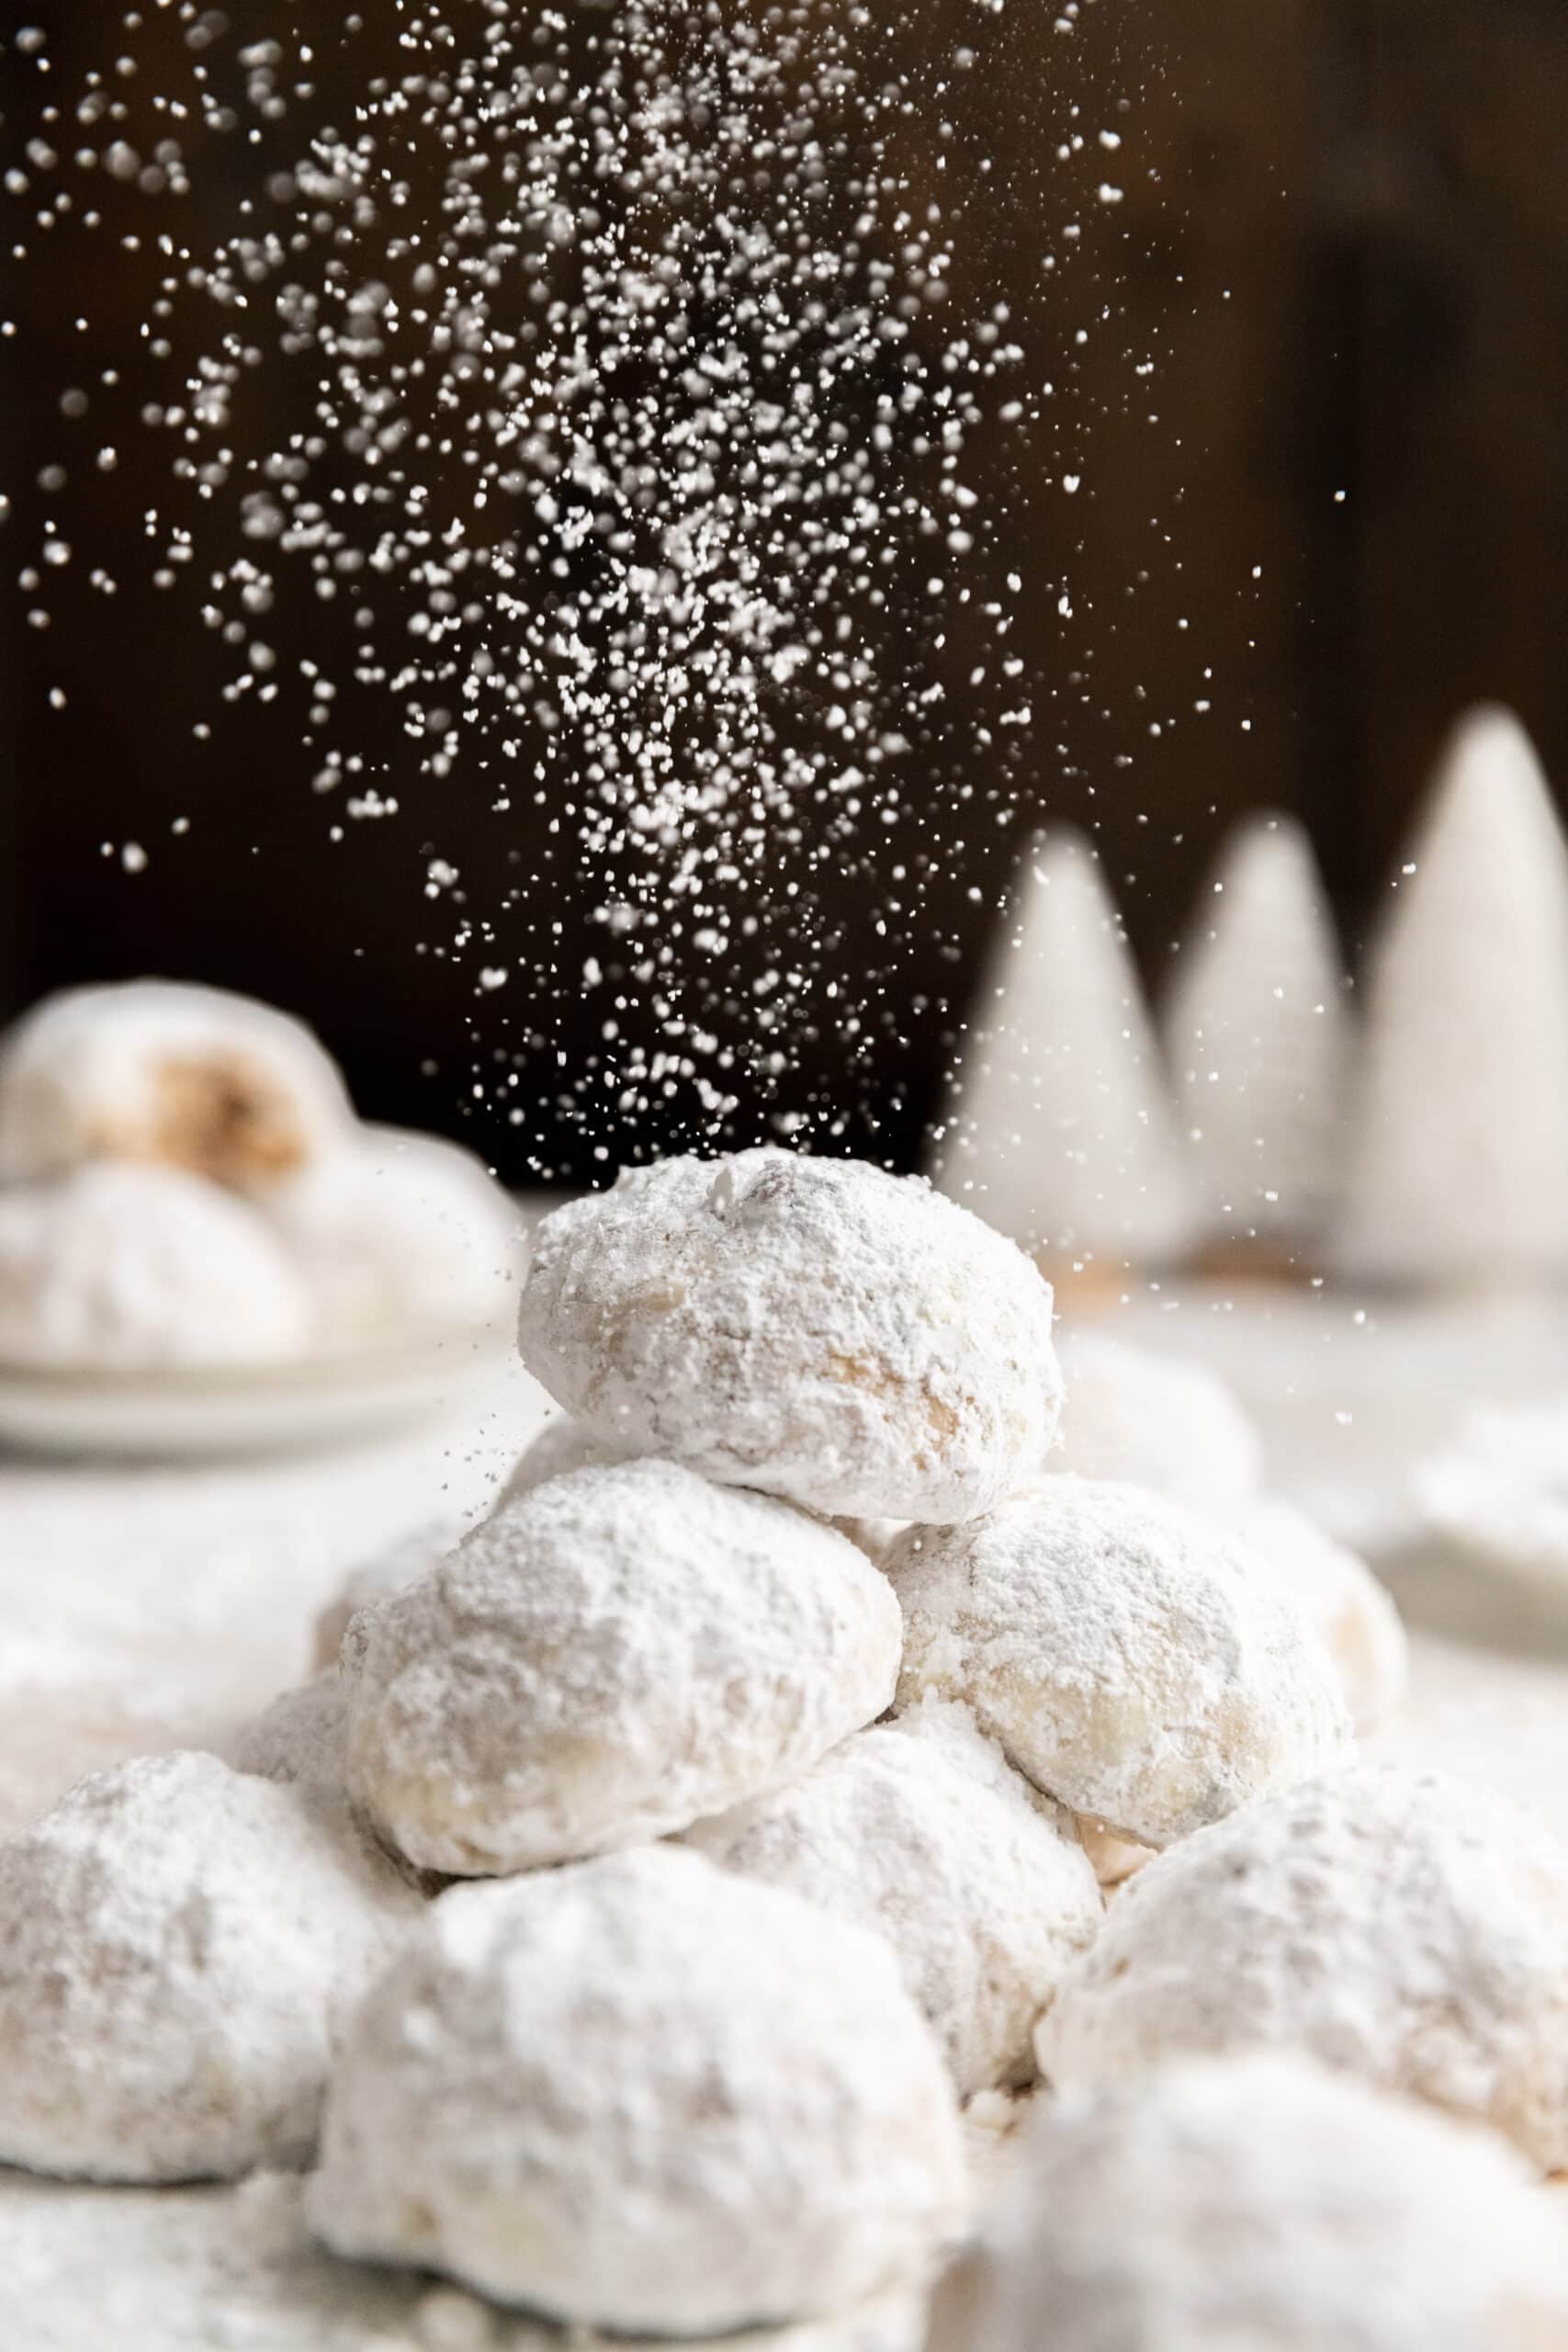 Side view of a stack of stollen balls being dusted with powdered sugar.